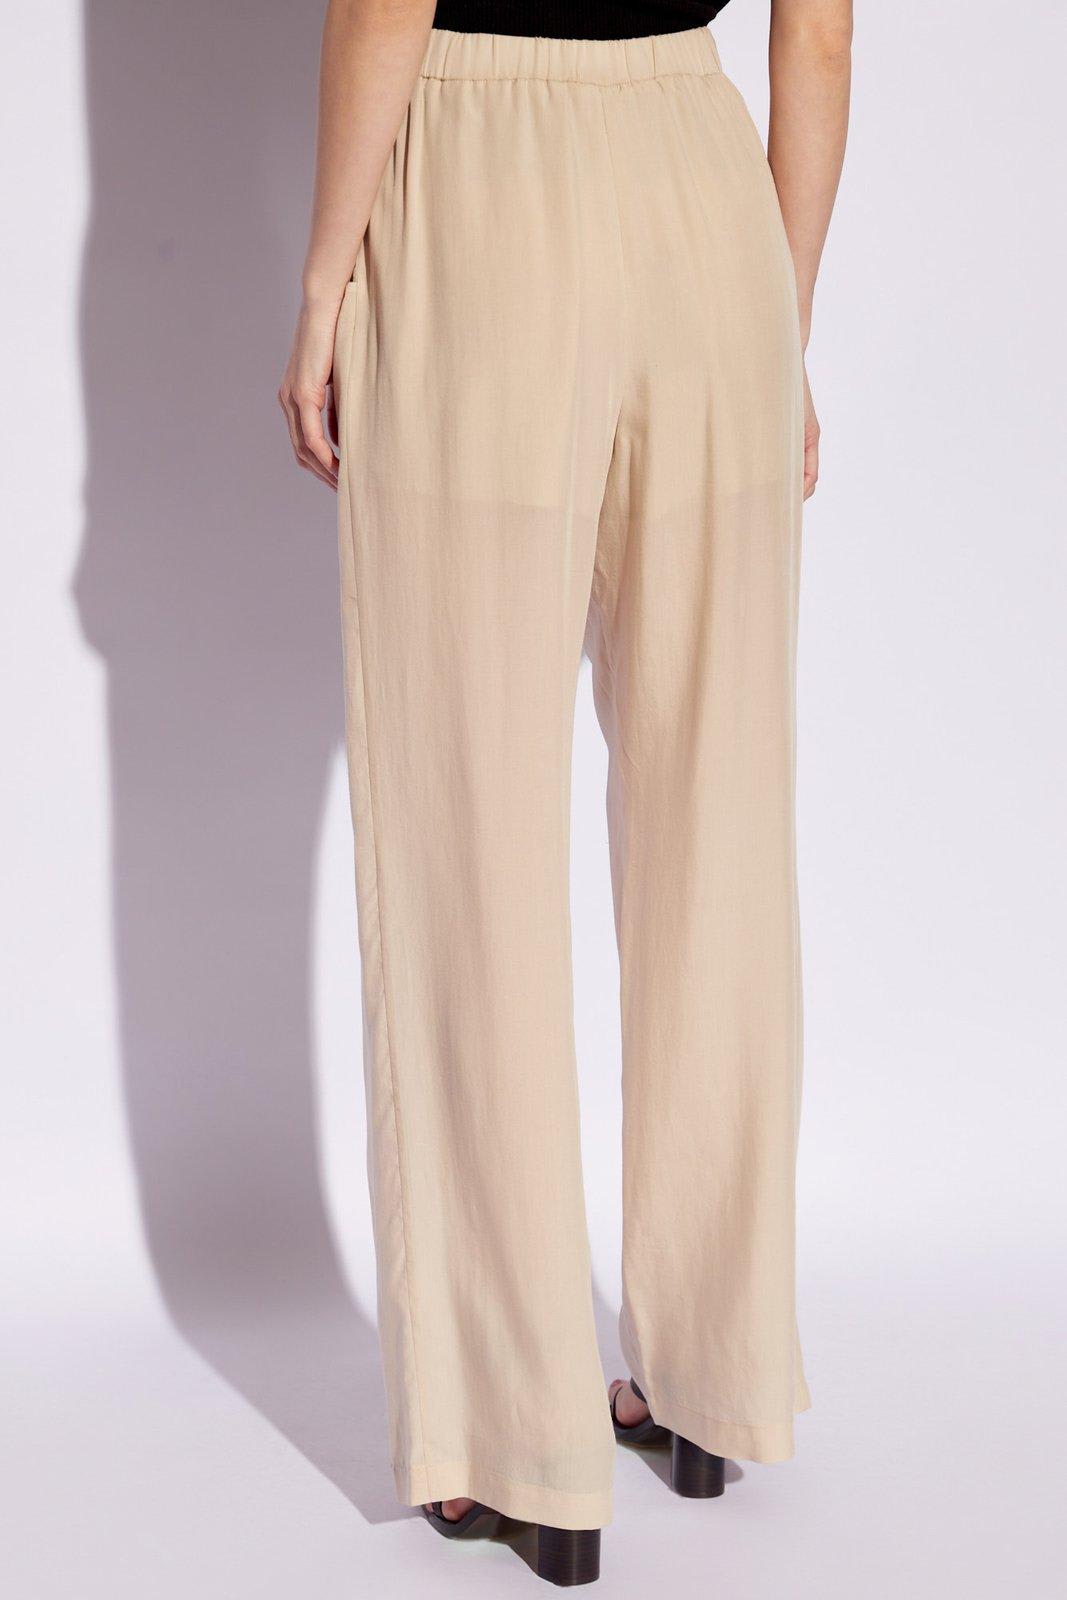 Shop Emporio Armani Loose Fitting Trousers In Beige